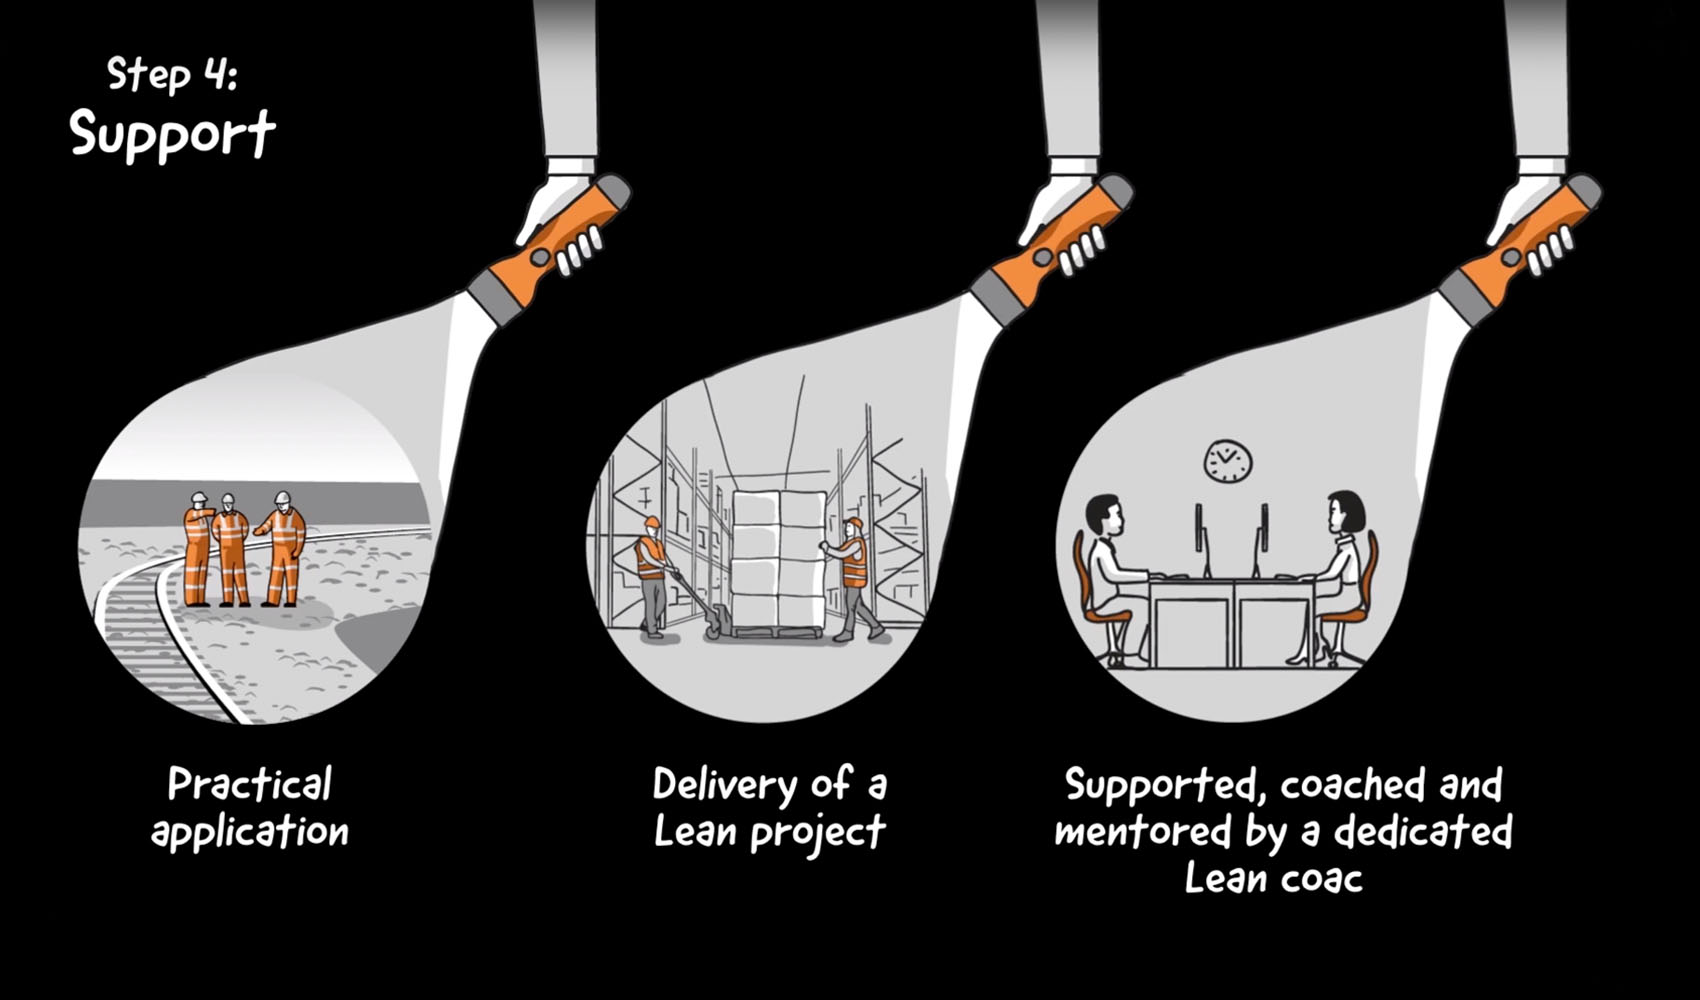 How do you capture the essence of Network Rail's new 'Lean ...